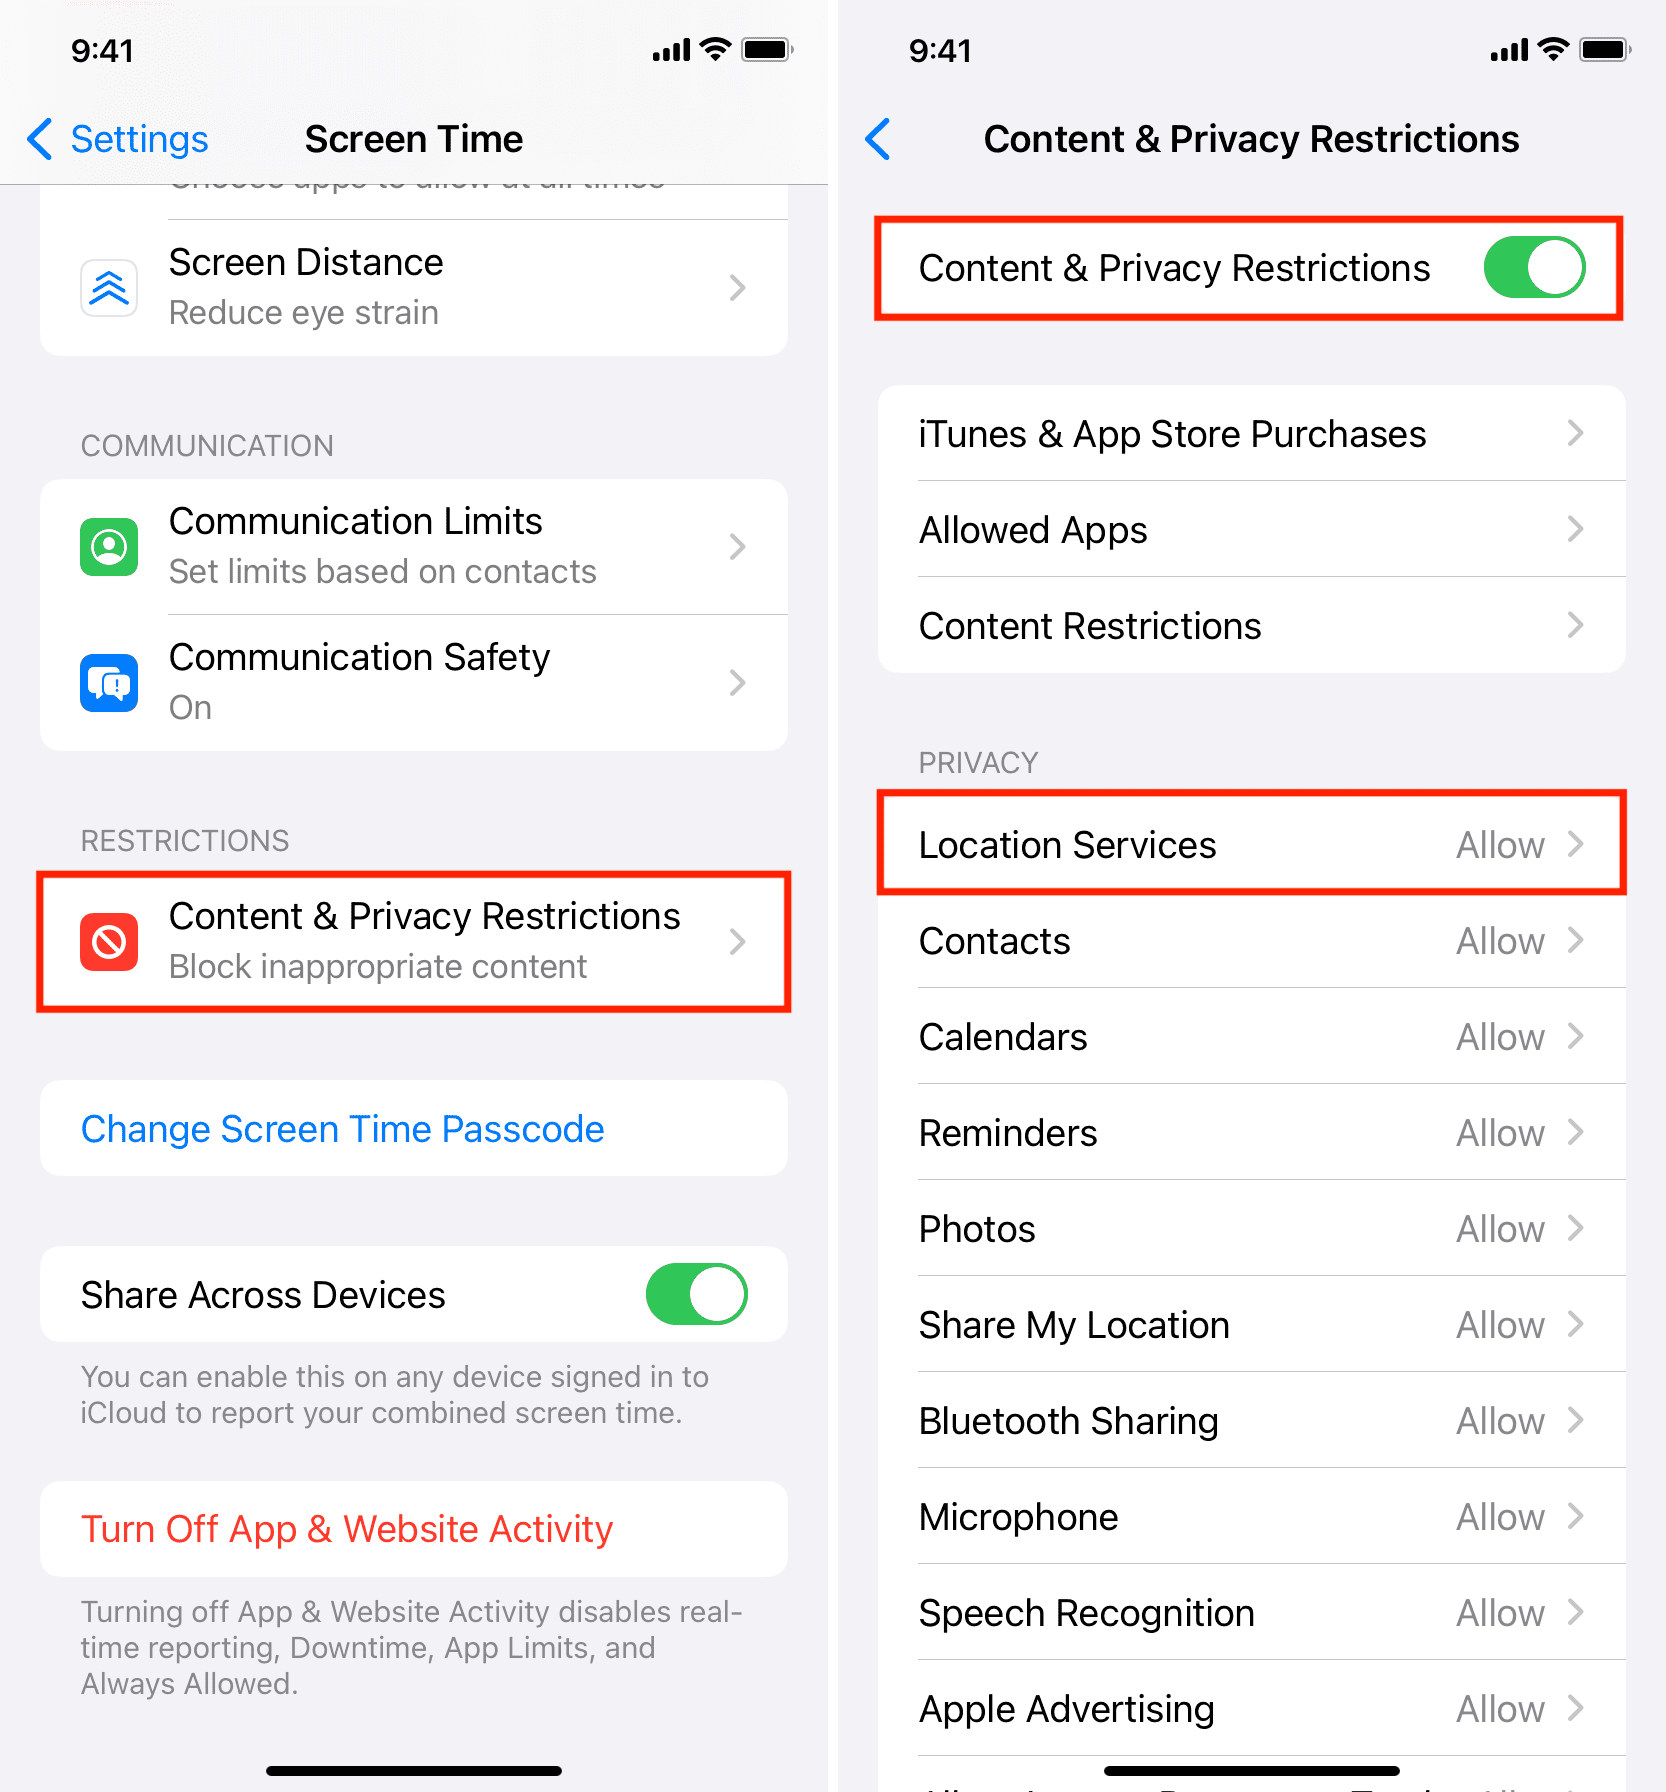 Location Services in Content and Privacy Restrictions on iPhone